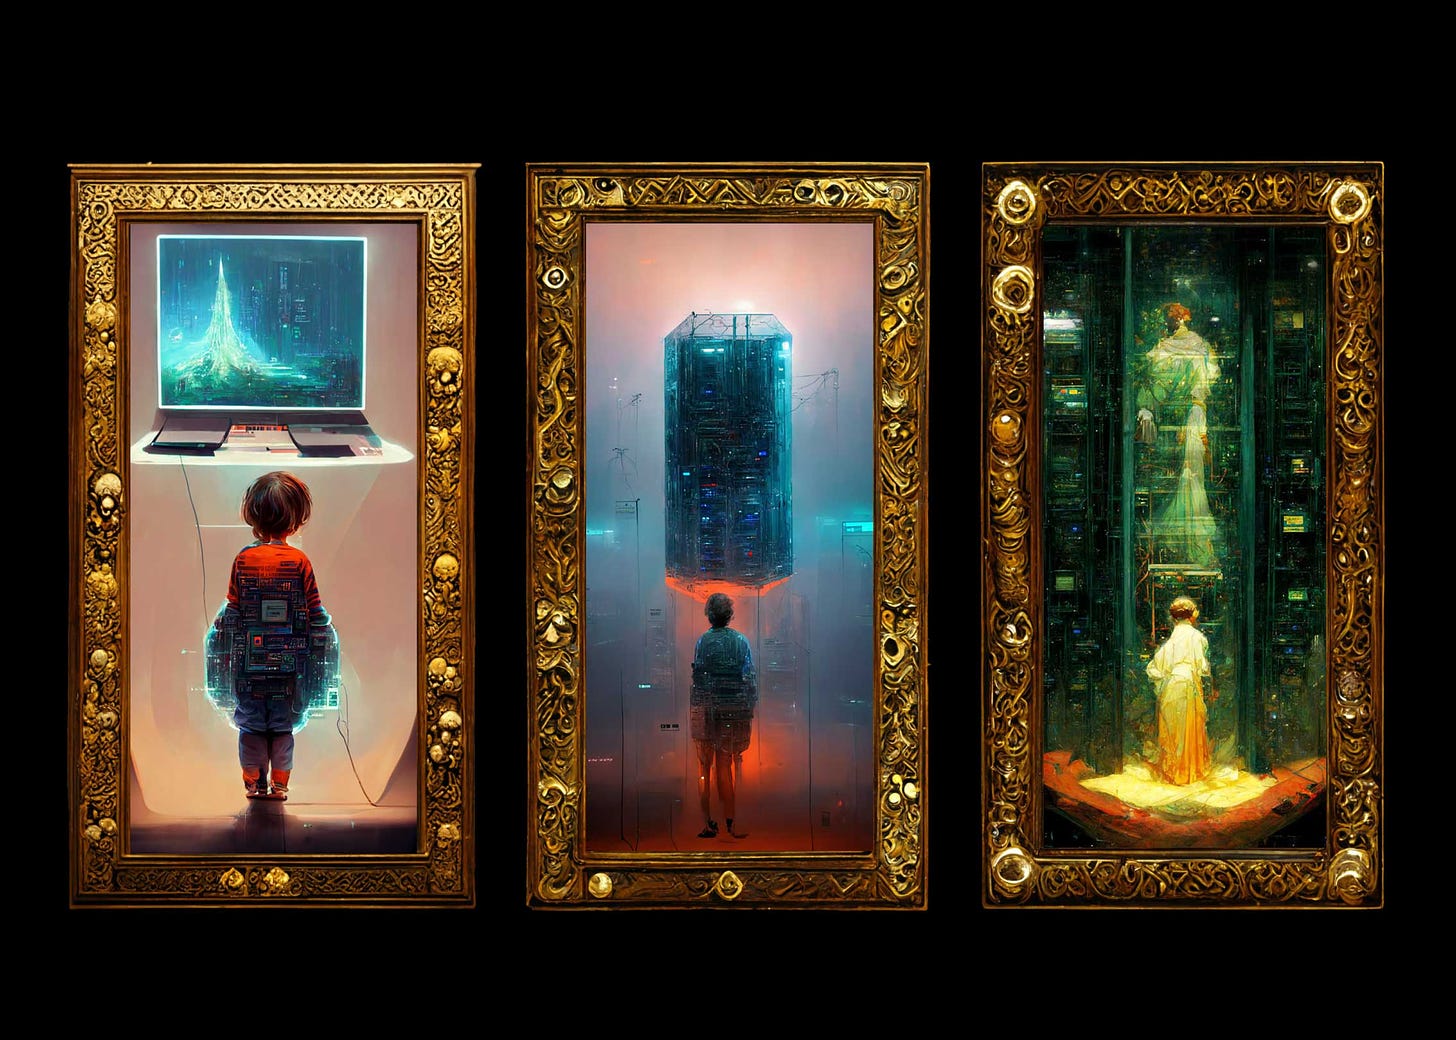 Triptych showing three stages in the evolution of a concept illustration created with Midjourney, an AI-powered image generation tool. The first image shows a figure from behind, standing in front of a floating laptop. The second shows a smaller figure, standing in front of a glowing supercomputer. The third shows a female subject, standing in front of a massive supercomputer with a ghostly image superimposed on top of it, painted in the style of Art Nouveau painter Alphonse Mucha.